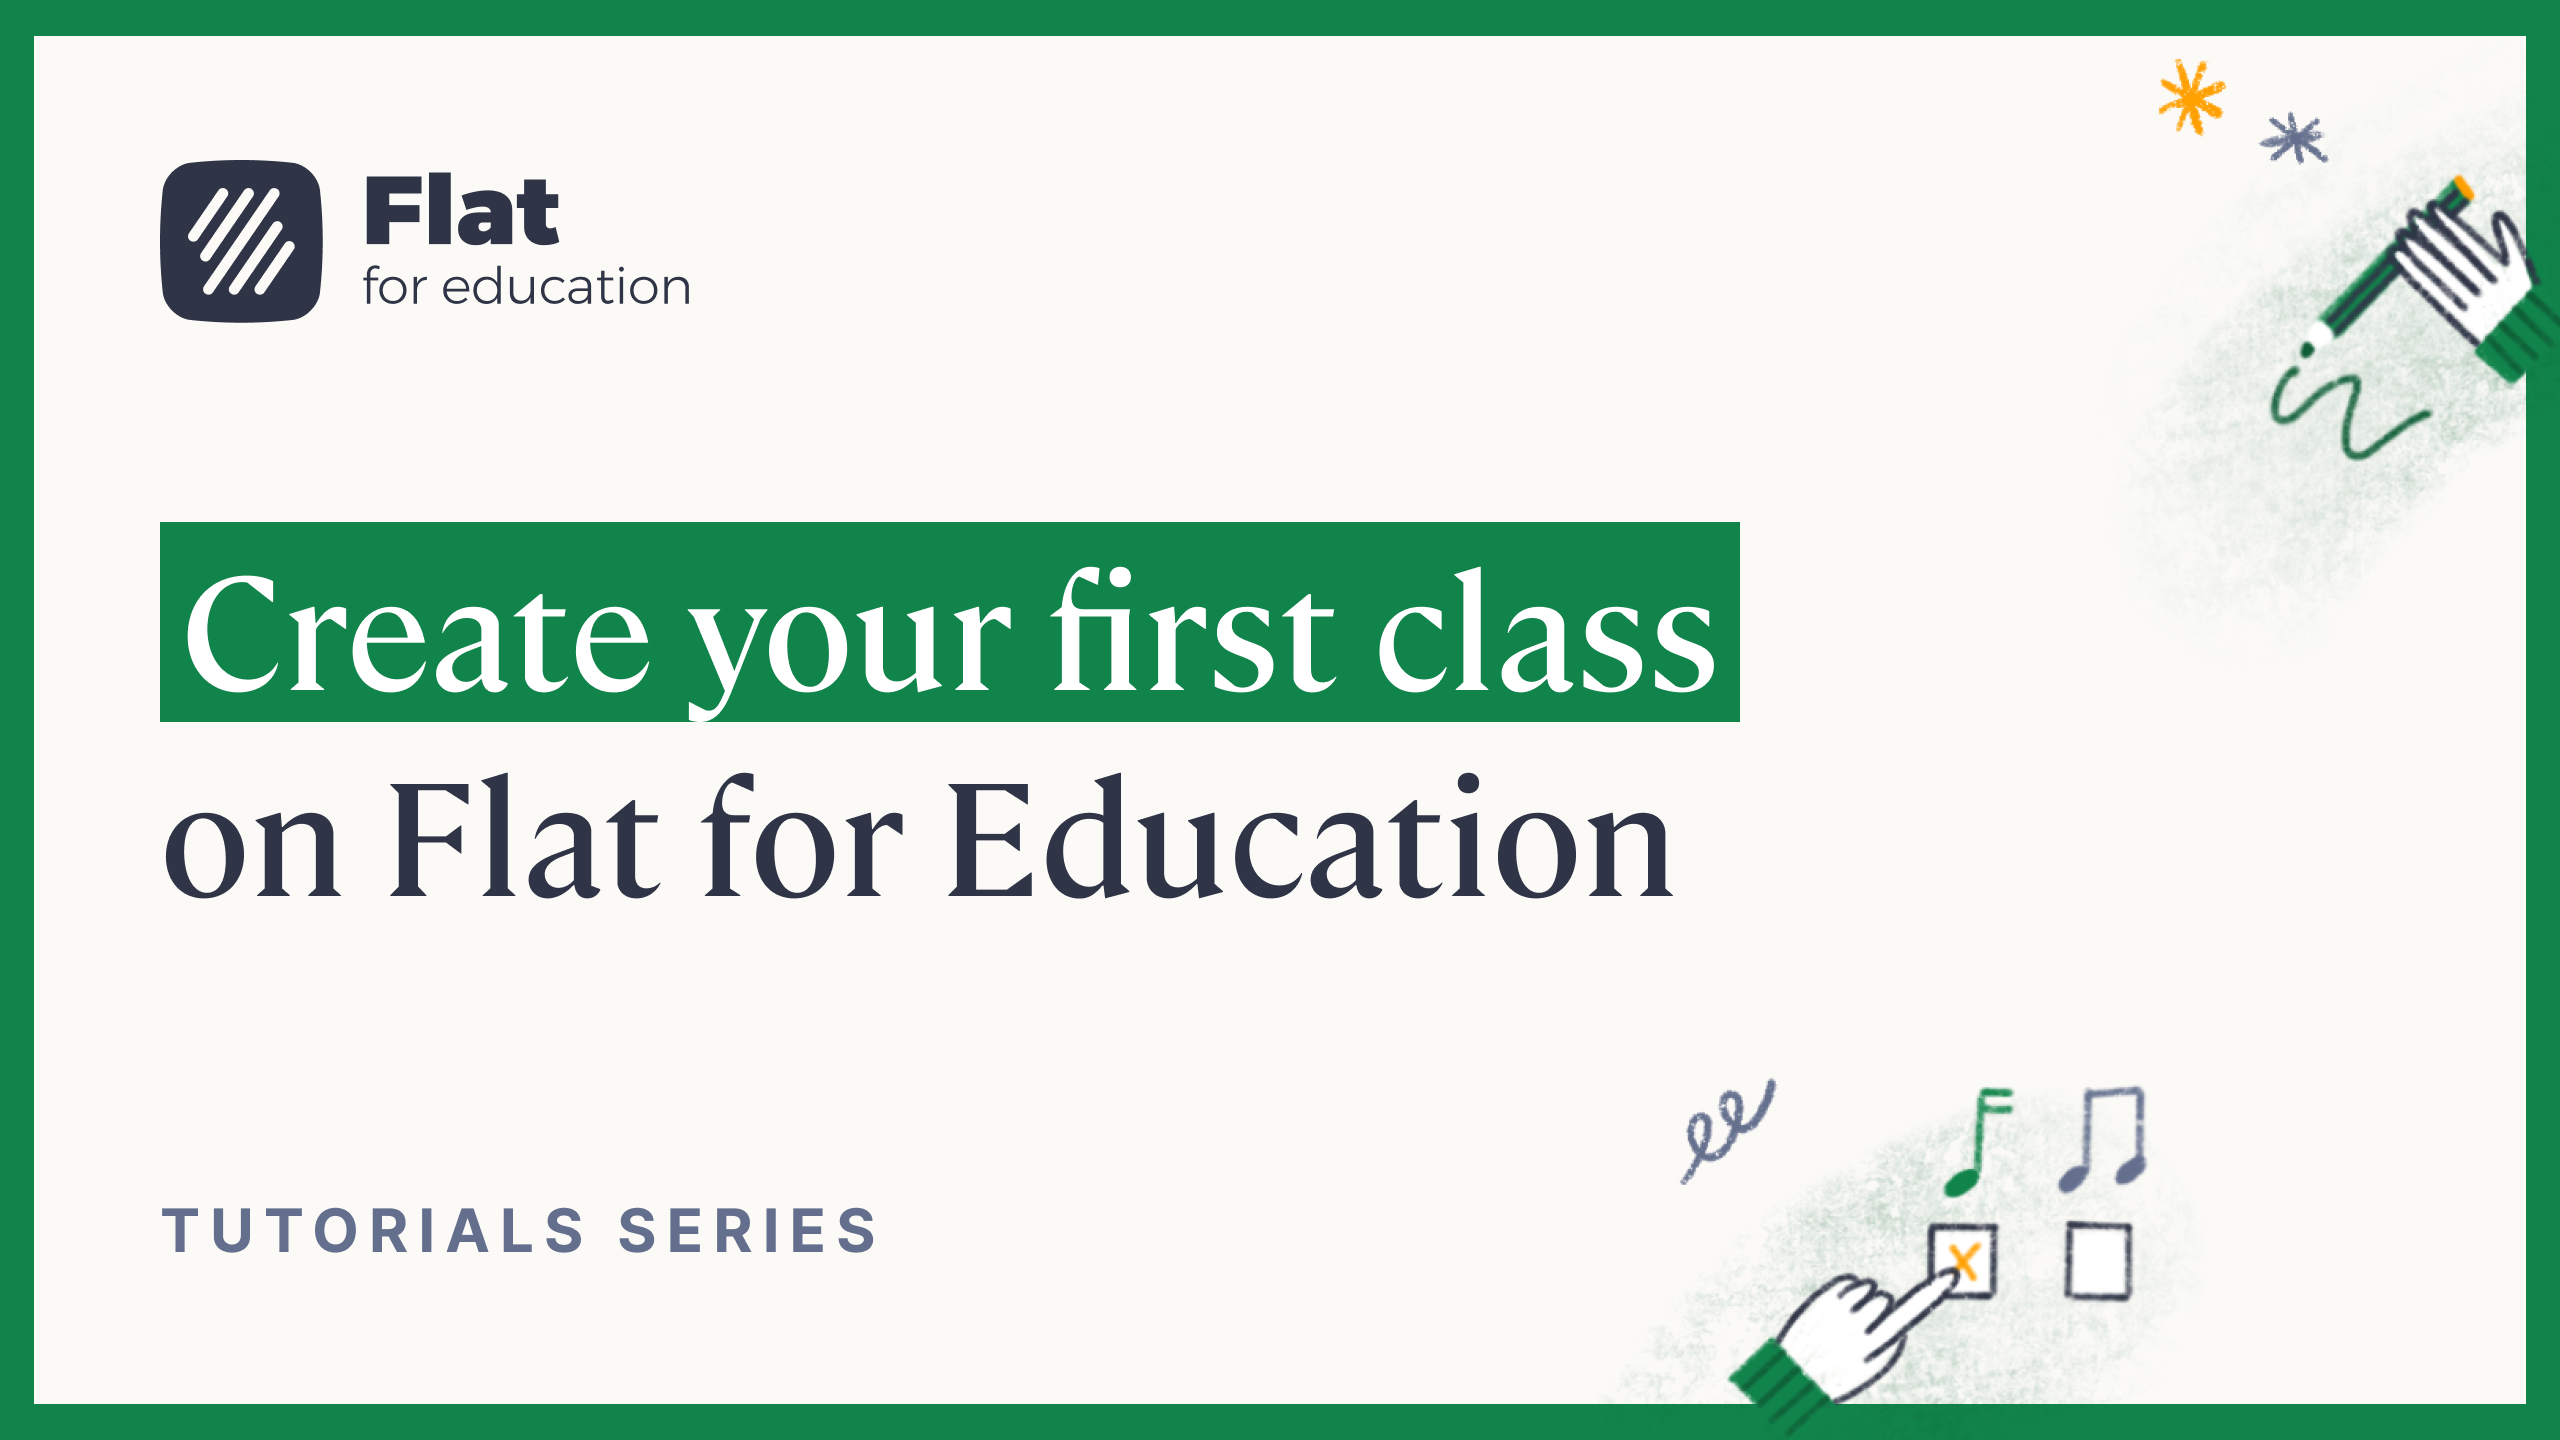 Create your first class on Flat for Education